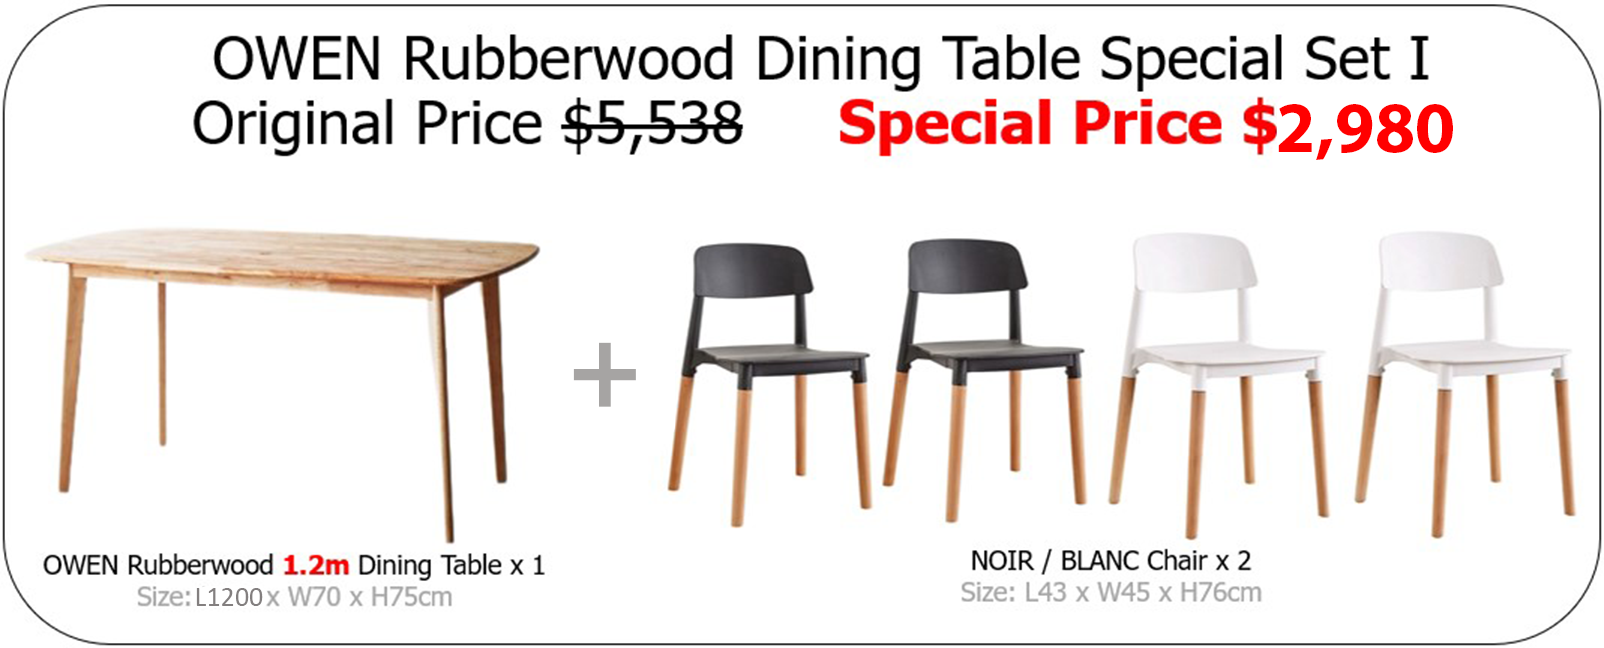 OWEN 1.2/1.5m Rubberwood Dining Table Special Set I